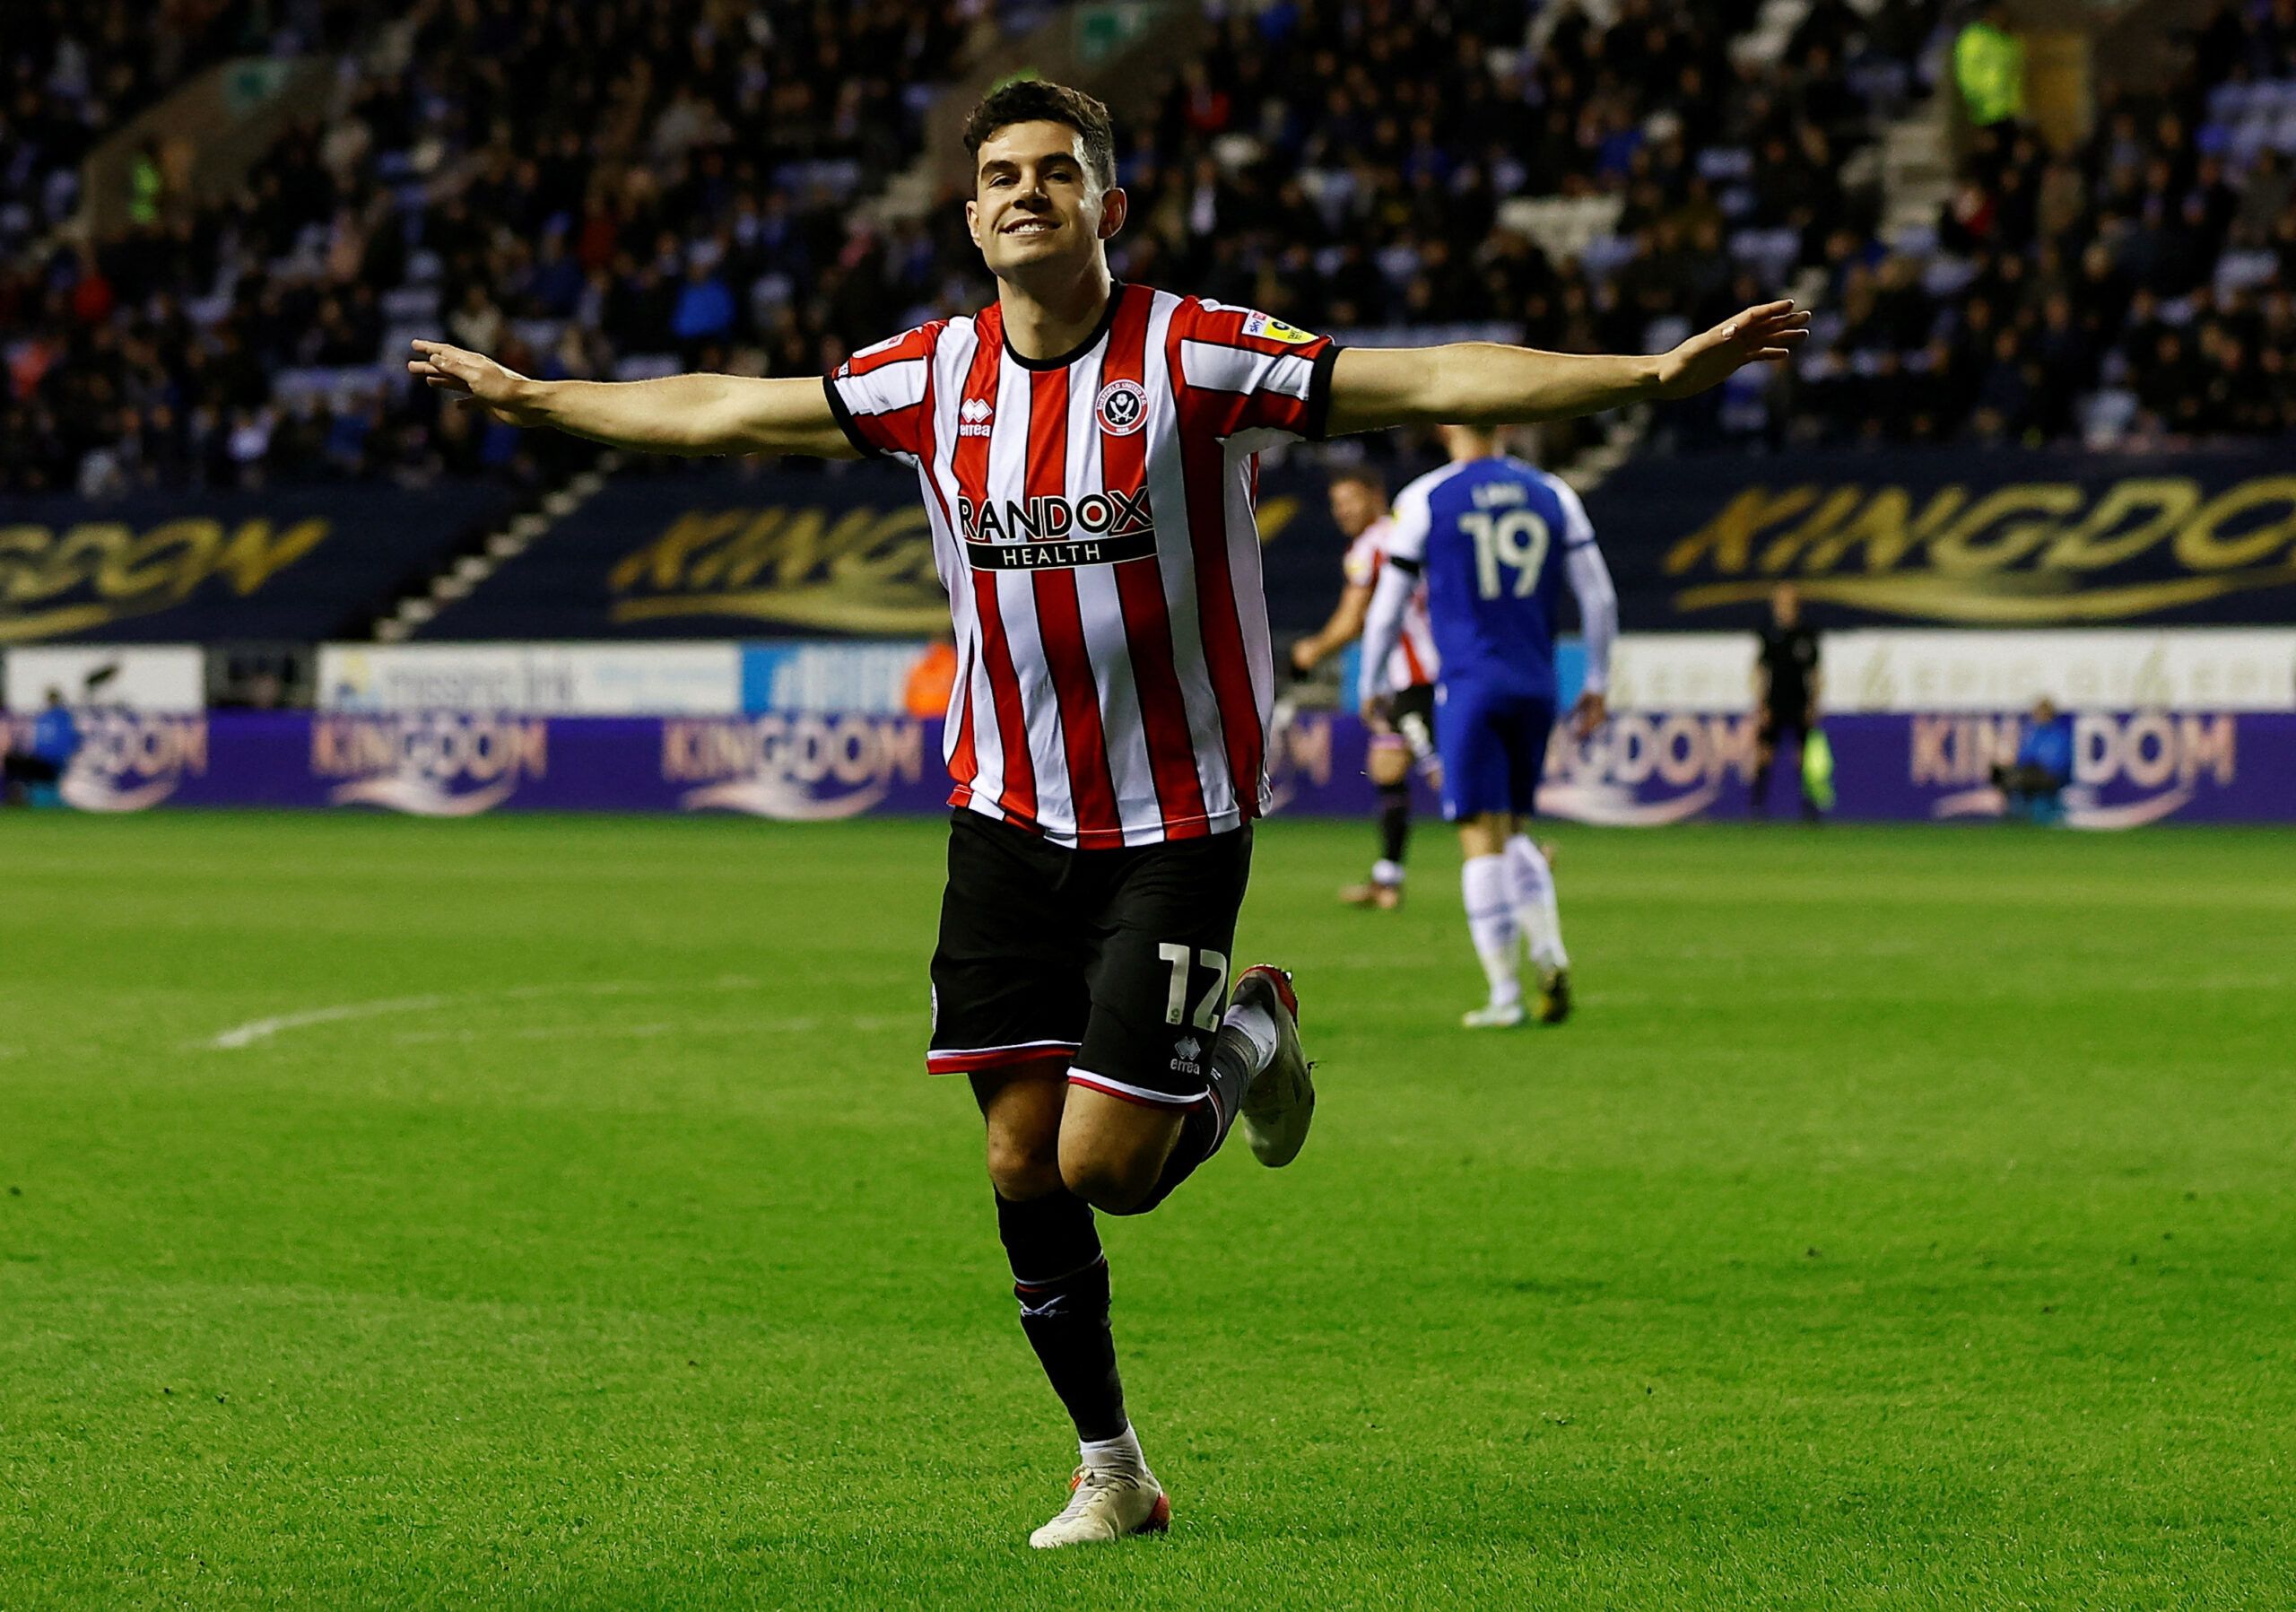 Soccer Football - Championship - Wigan Athletic v Sheffield United - DW Stadium, Wigan, Britain - December 19, 2022 Sheffield United's John Egan celebrates scoring their first goal Action Images/Jason Cairnduff  EDITORIAL USE ONLY. No use with unauthorized audio, video, data, fixture lists, club/league logos or 